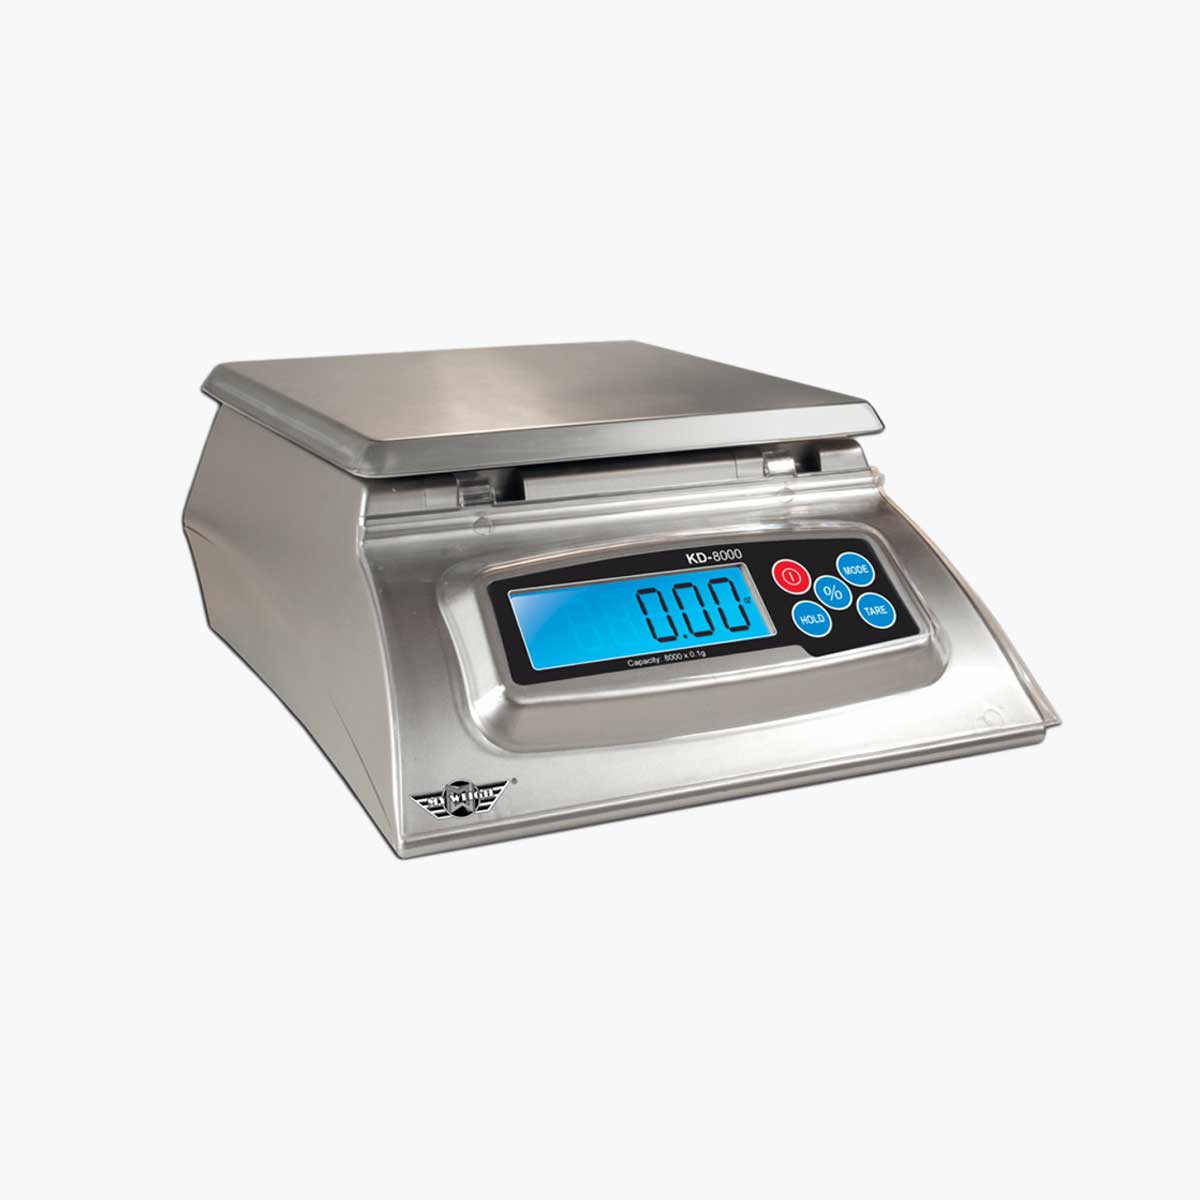 A stainless steel My Weight kitchen digital scale.